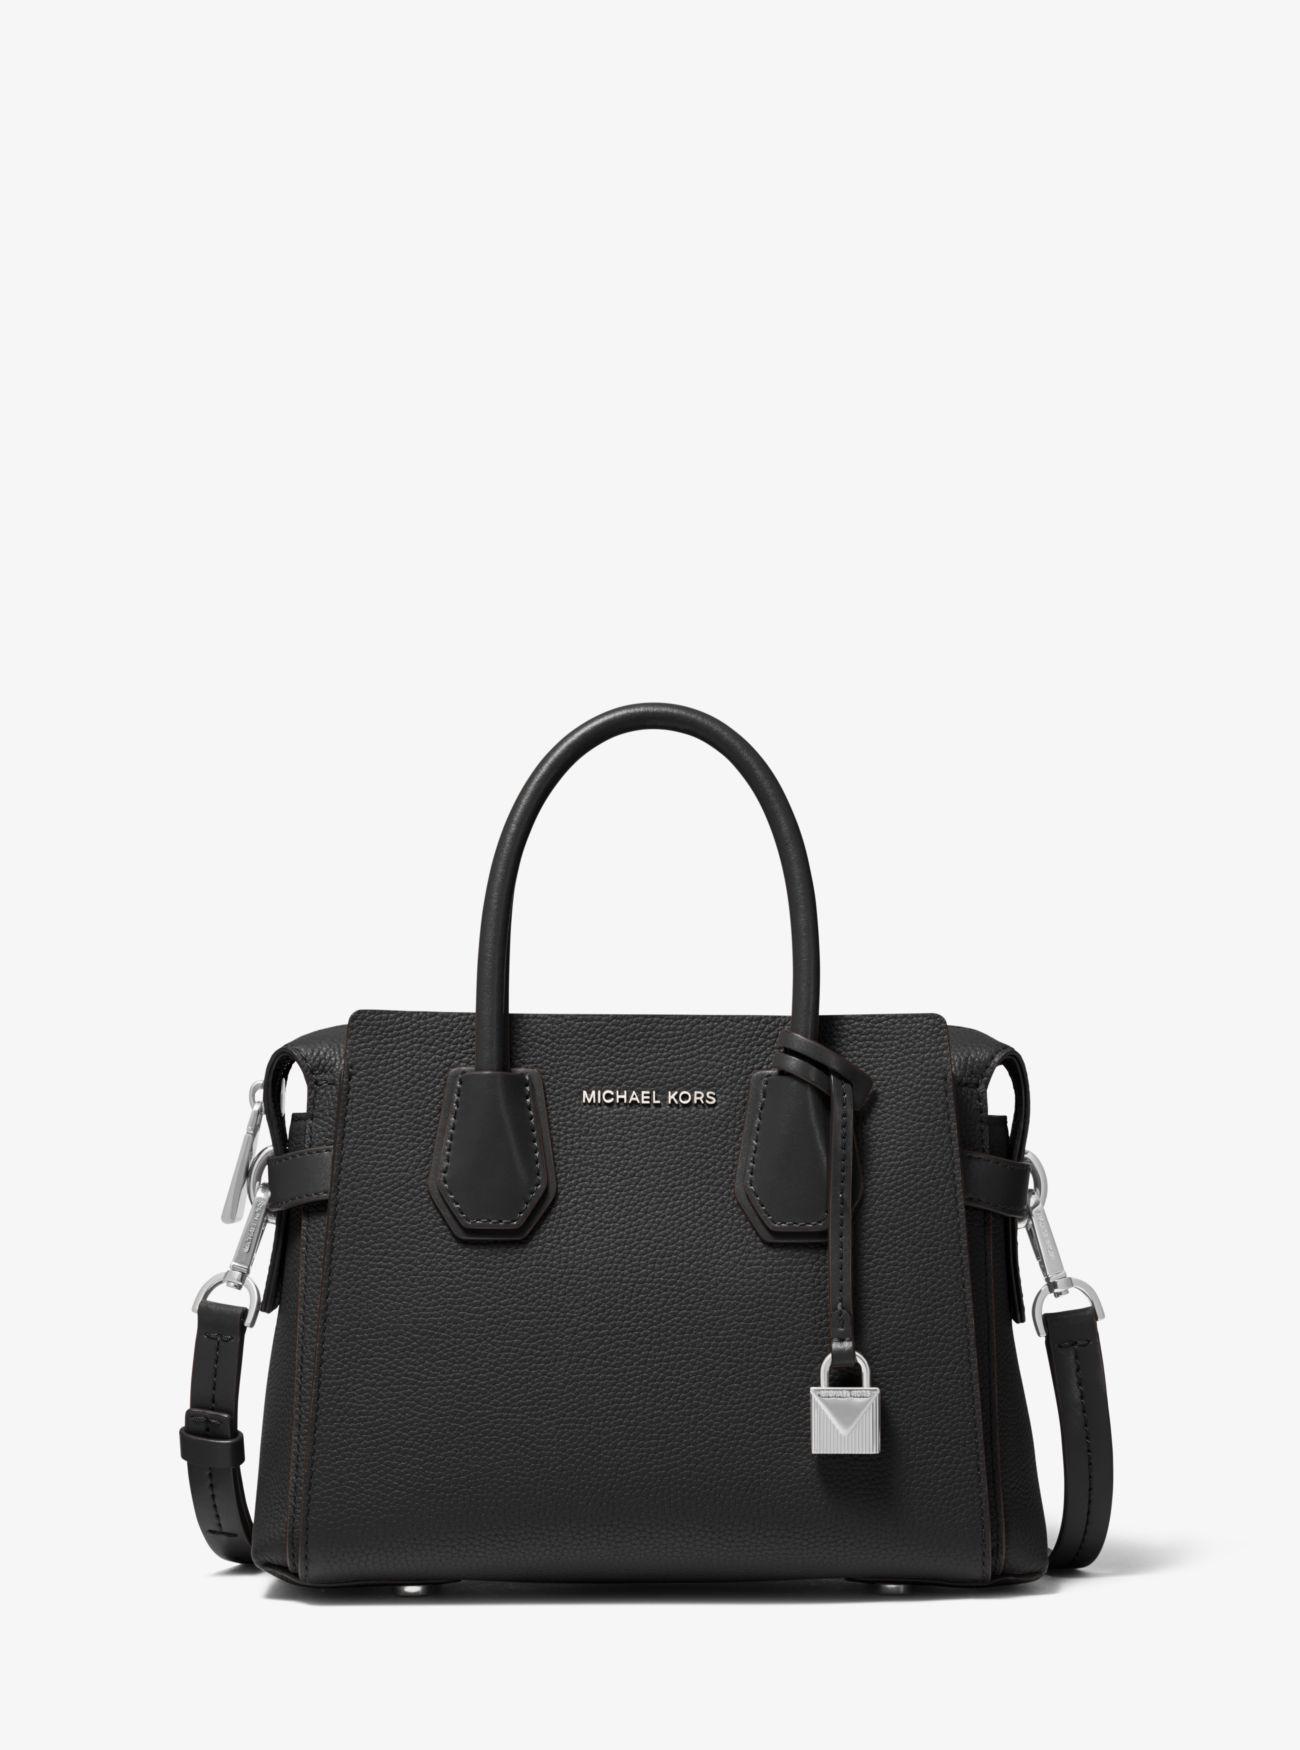 Michael Kors Mercer Small Pebbled Leather Belted Satchel in Black - Lyst